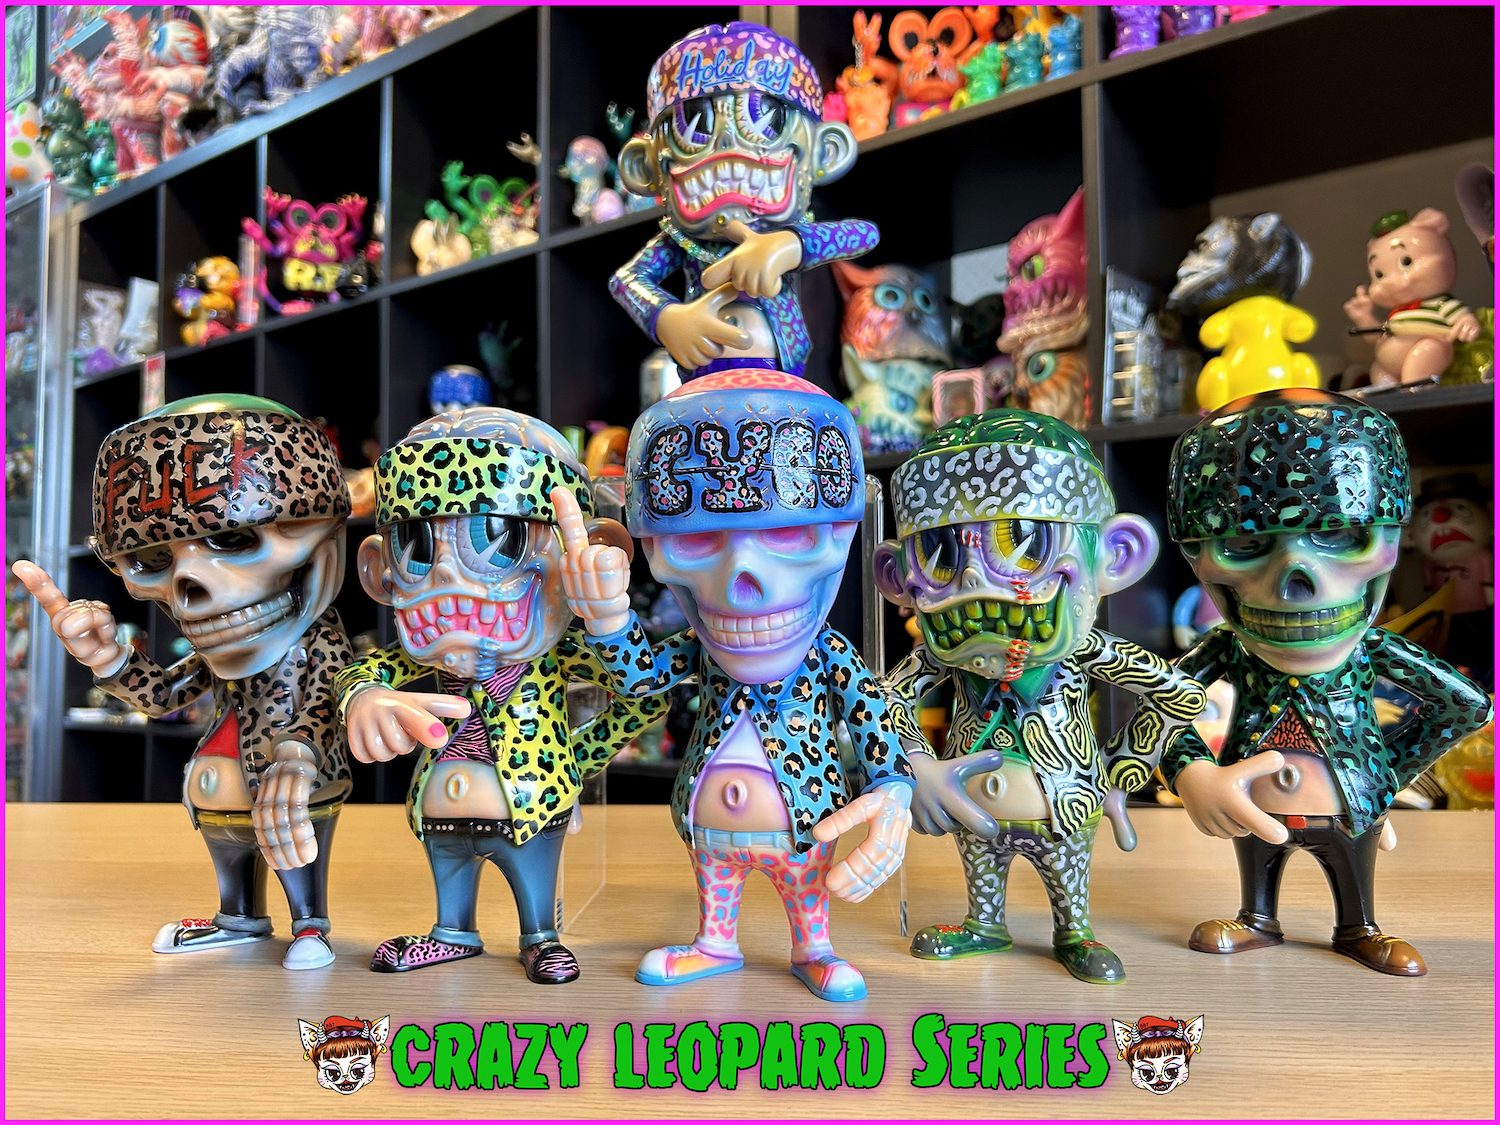 Crazy Leopard one offs by Melo of BBT Lottery